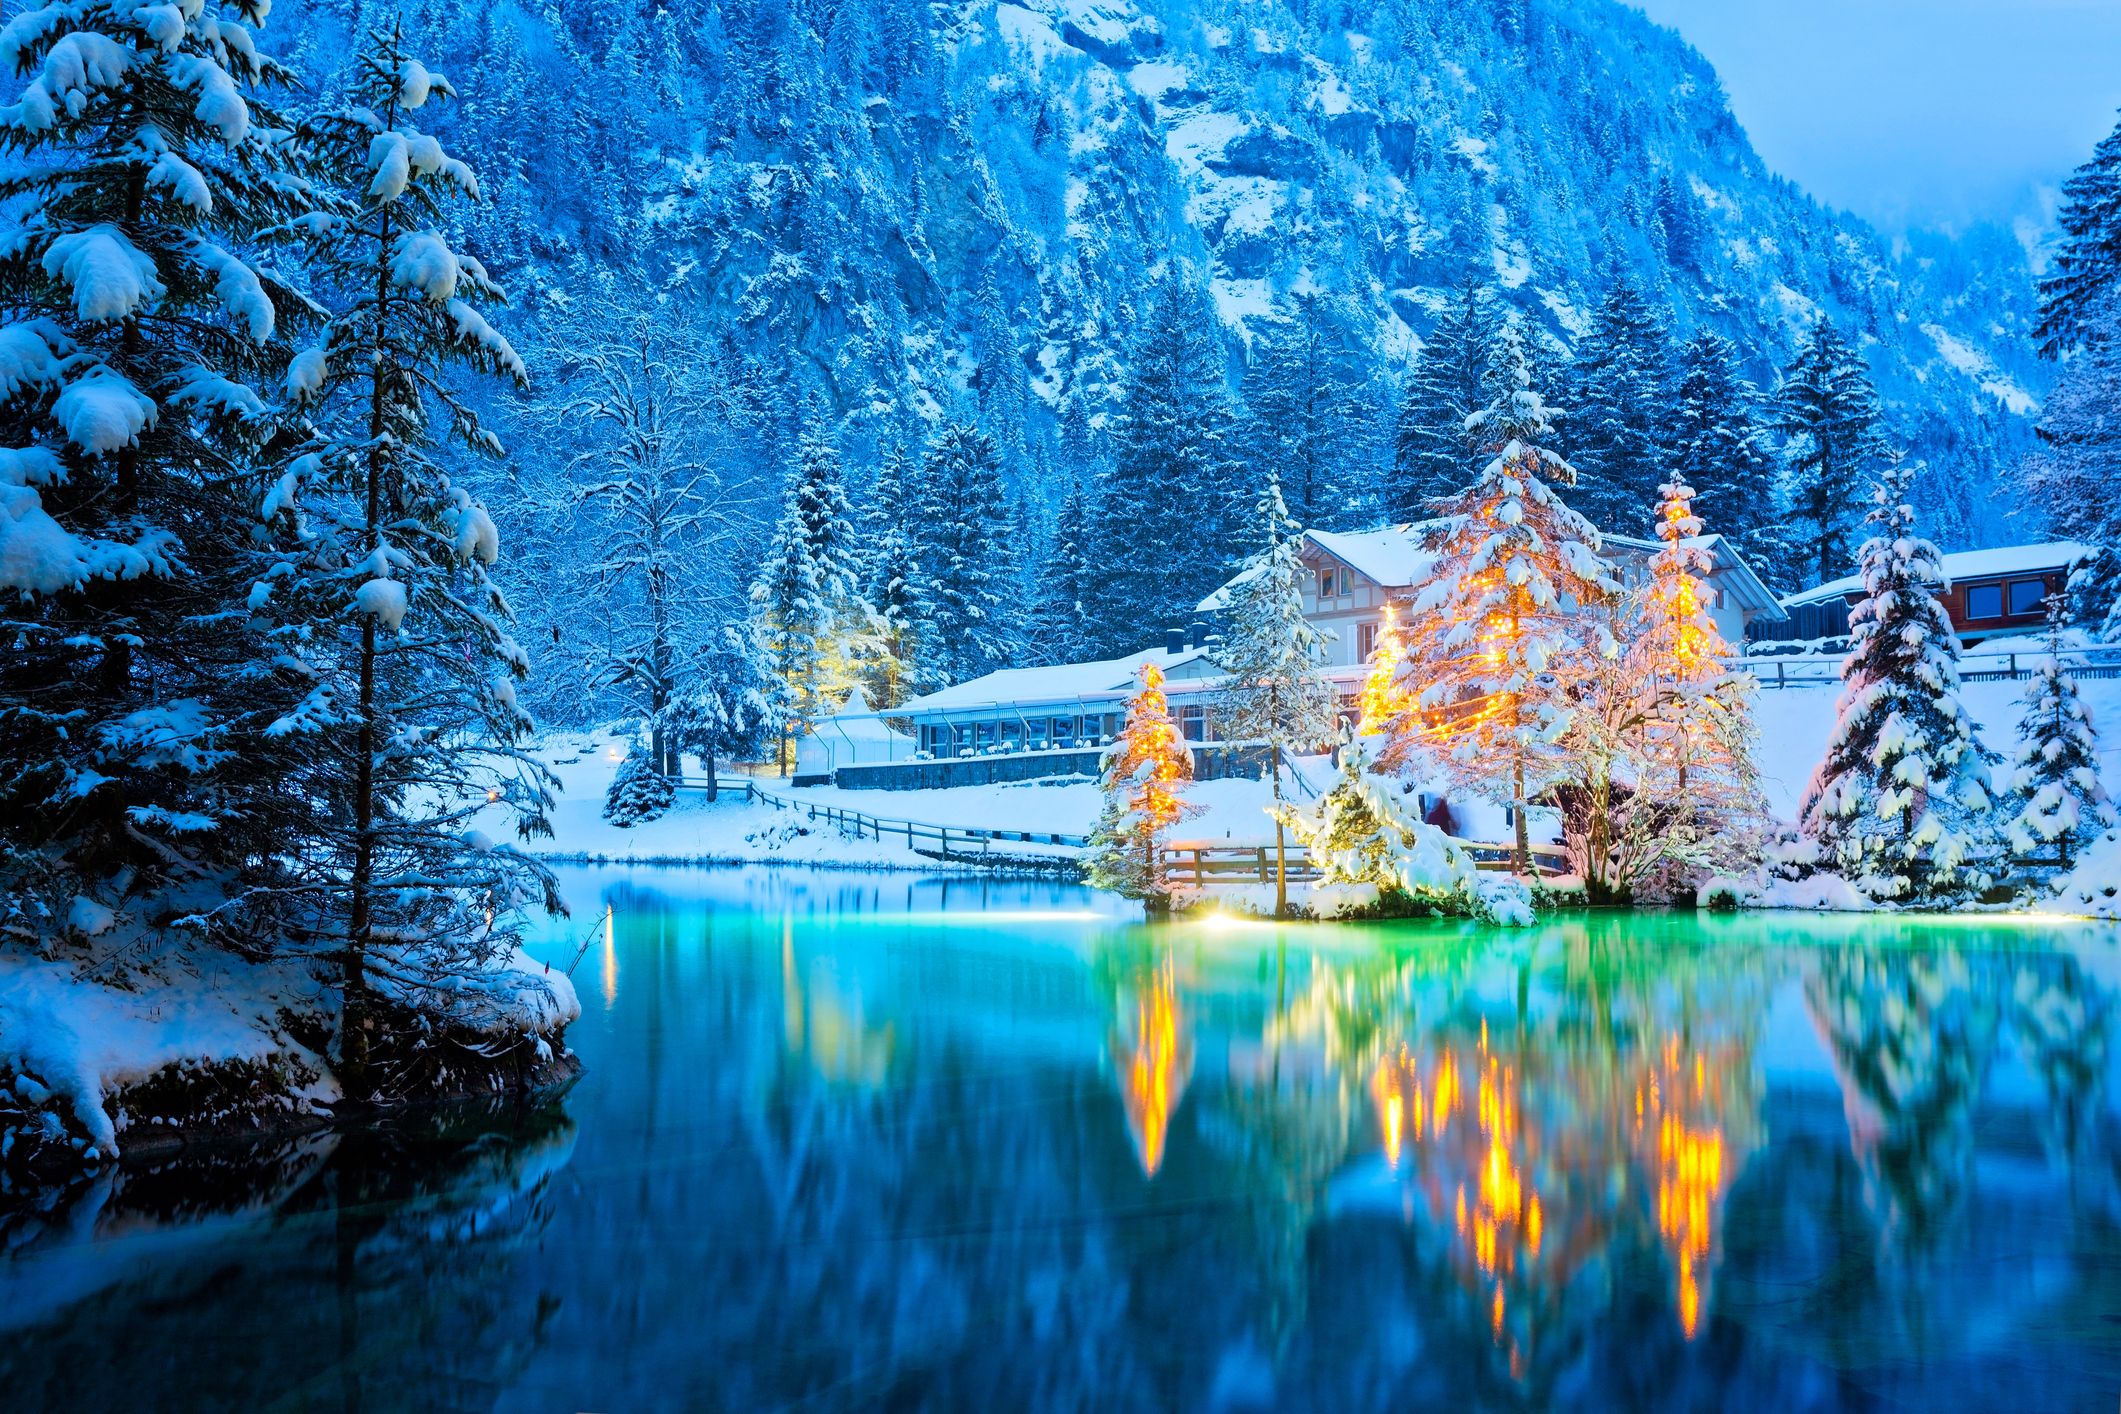 Switzerland in winter: The beautiful places to go